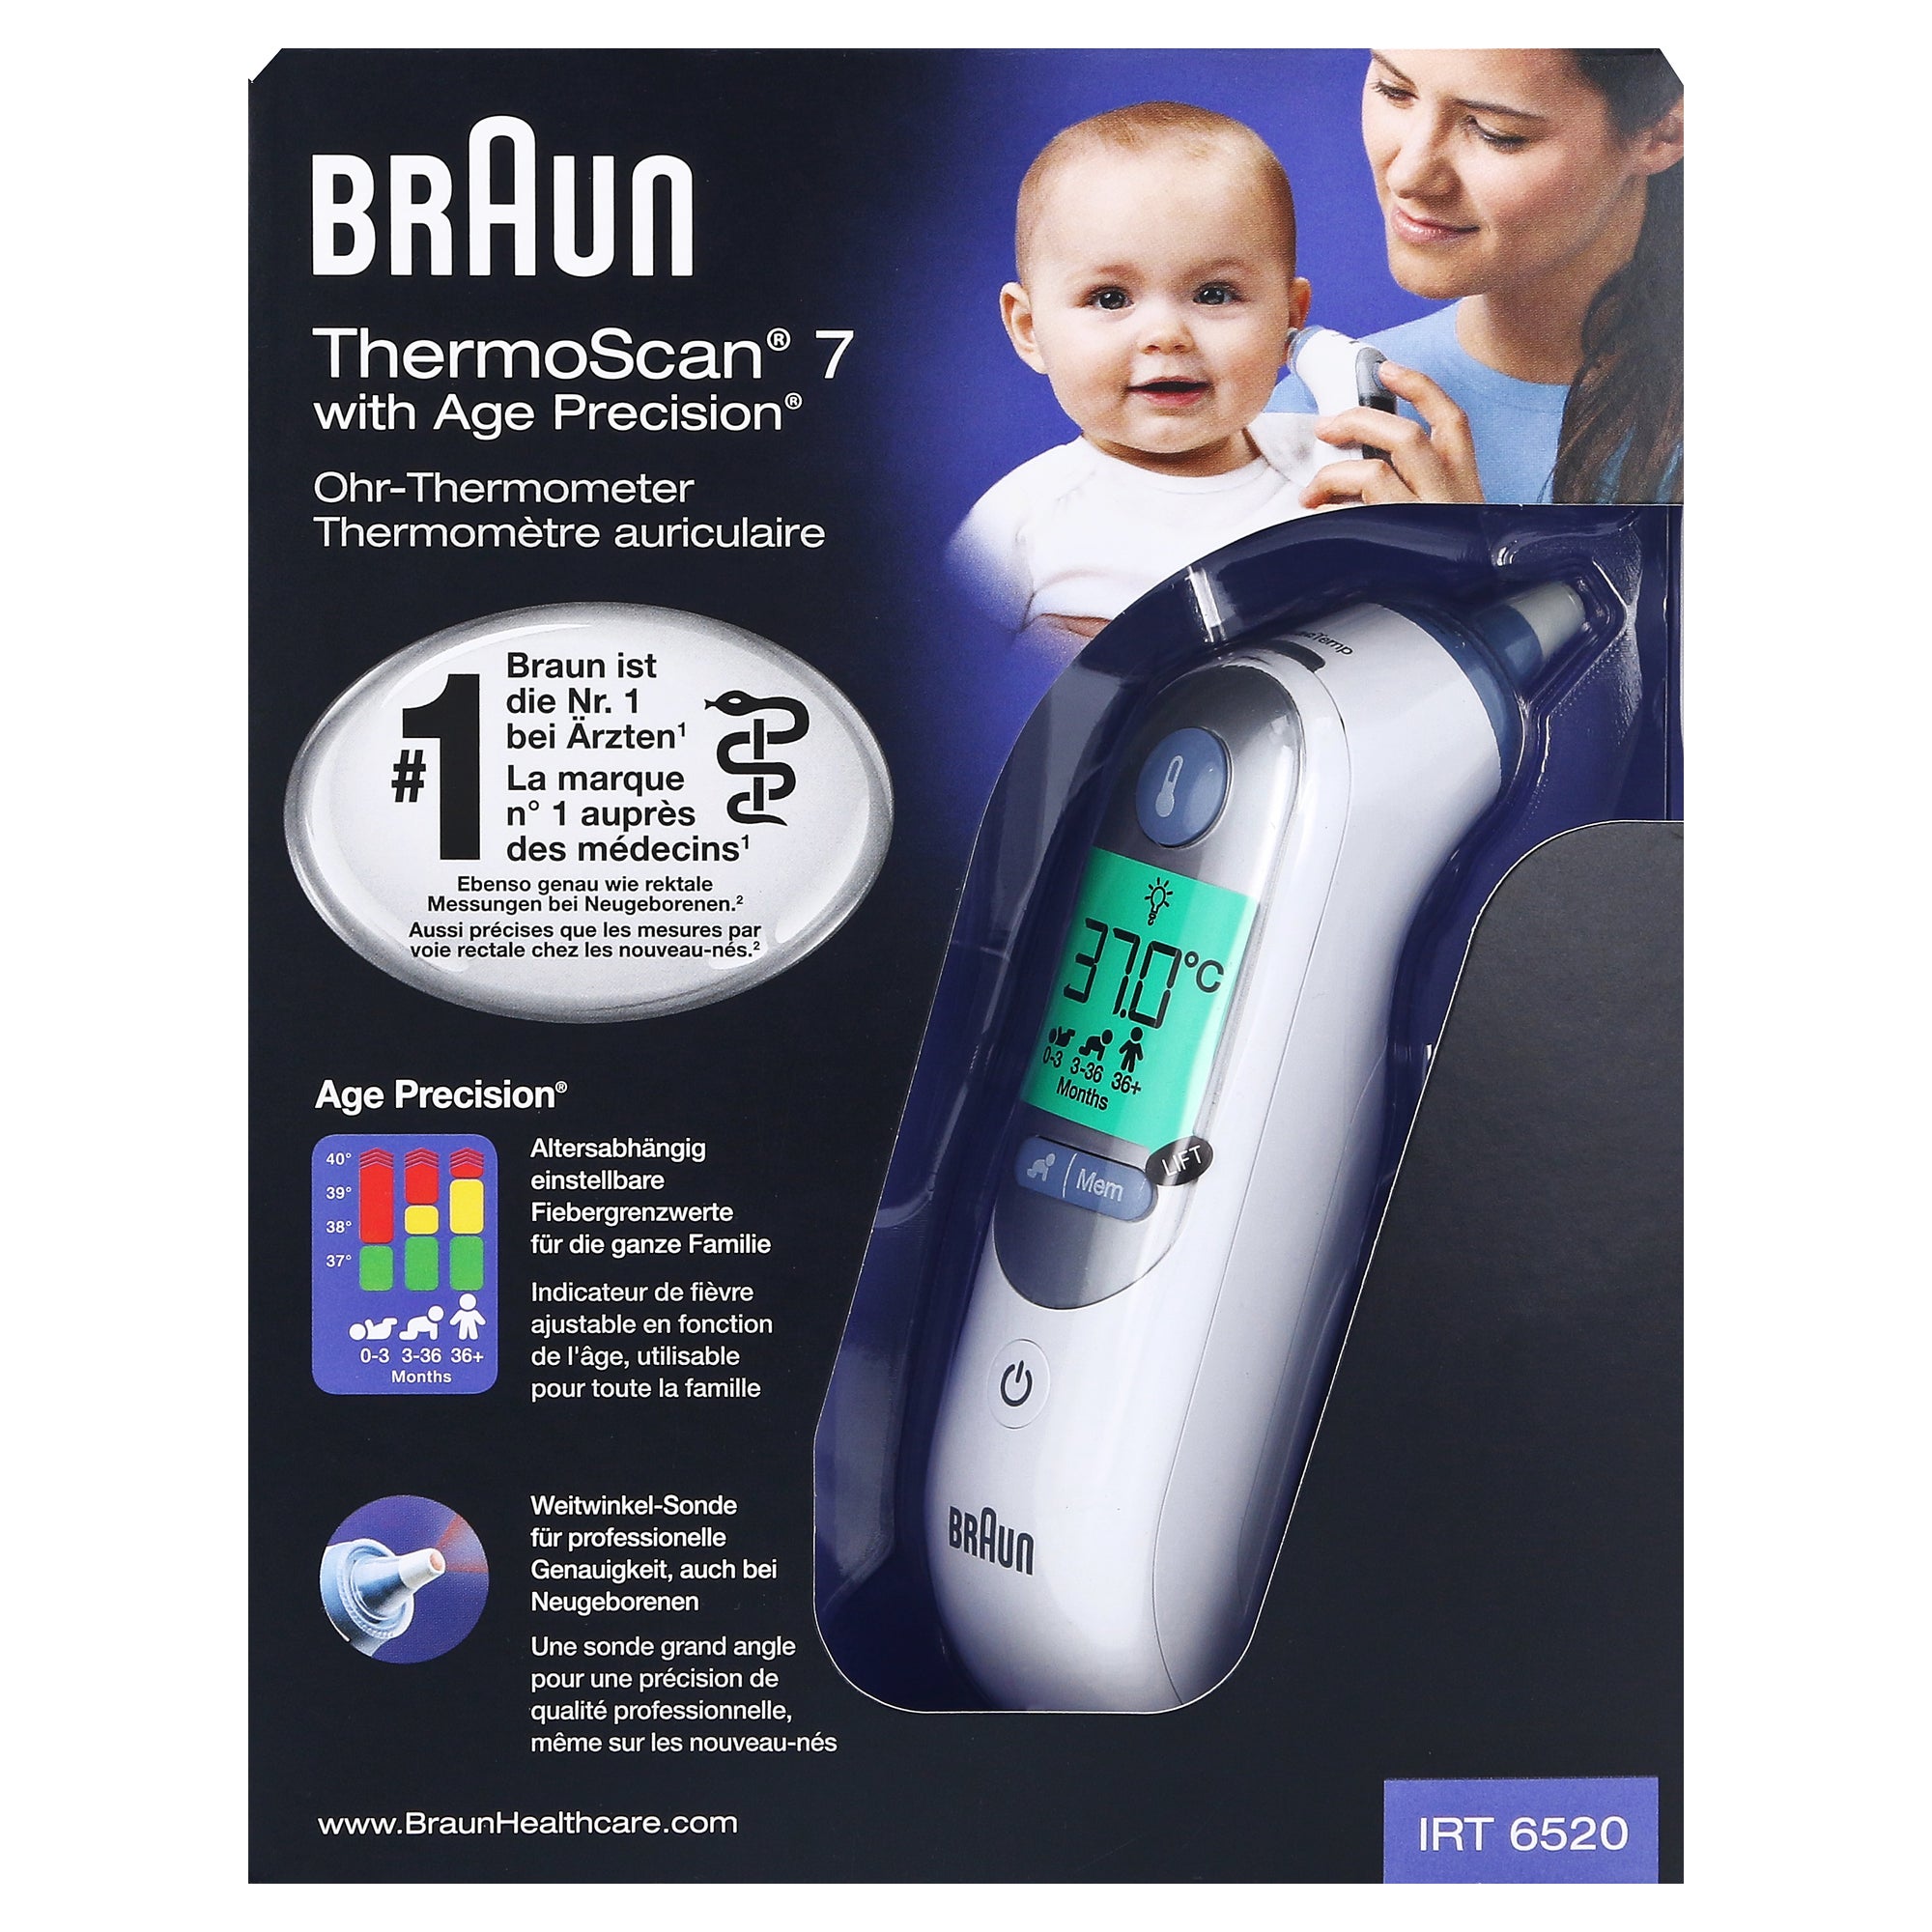 Thermoscan 7 online | DocMorris Irt6520 St. kaufen Ohrthermometer, 1